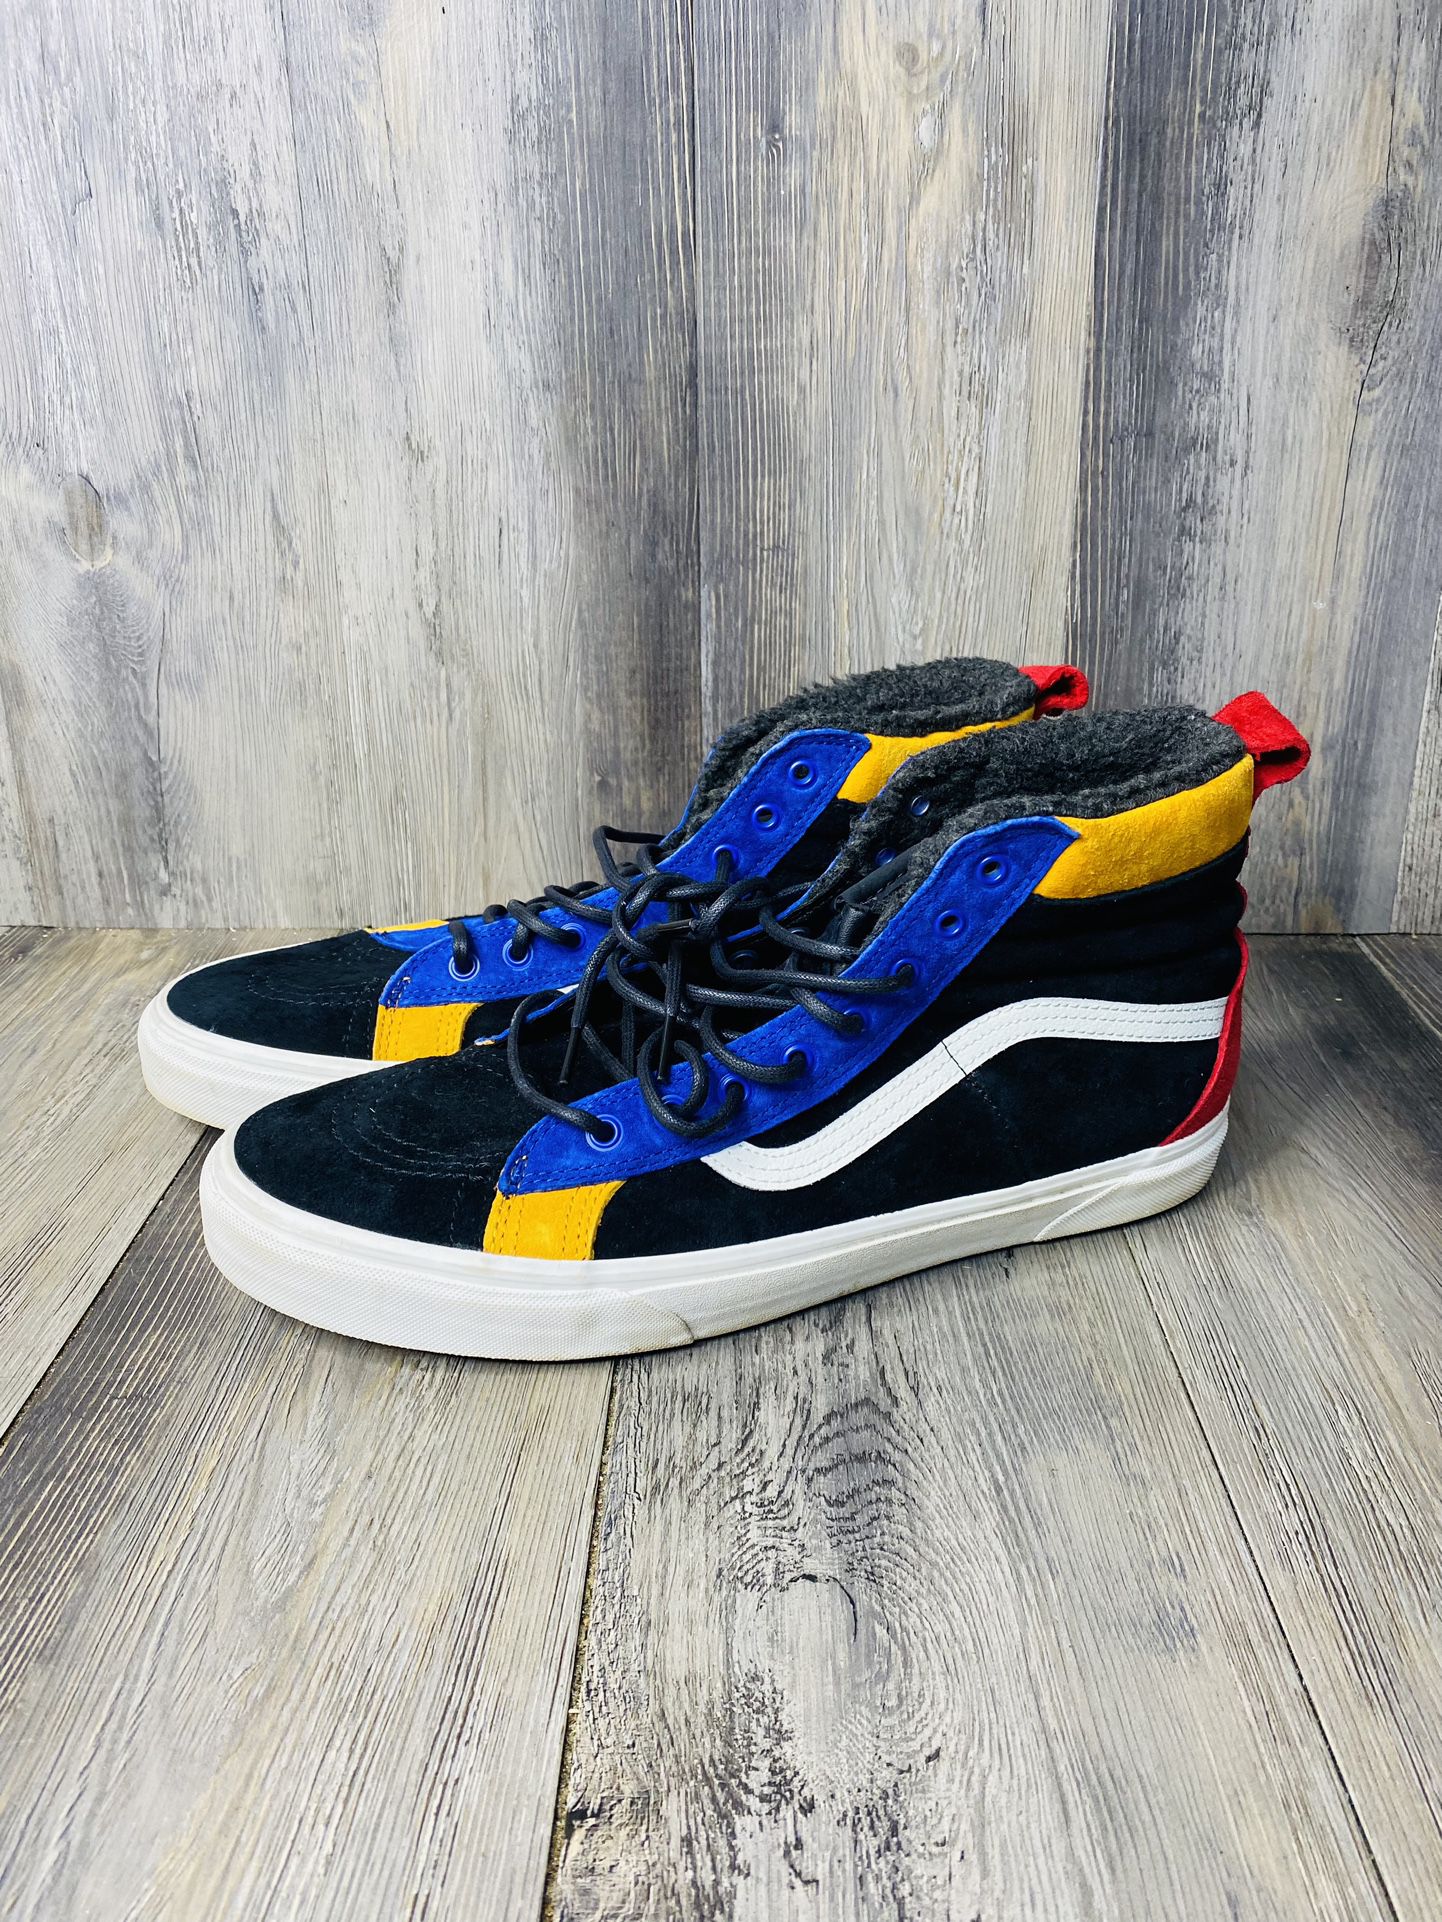 Vans Sk8-Hi 46 MTE DX Surf the Web Mens Size 13 Blue Red Yellow White Suede